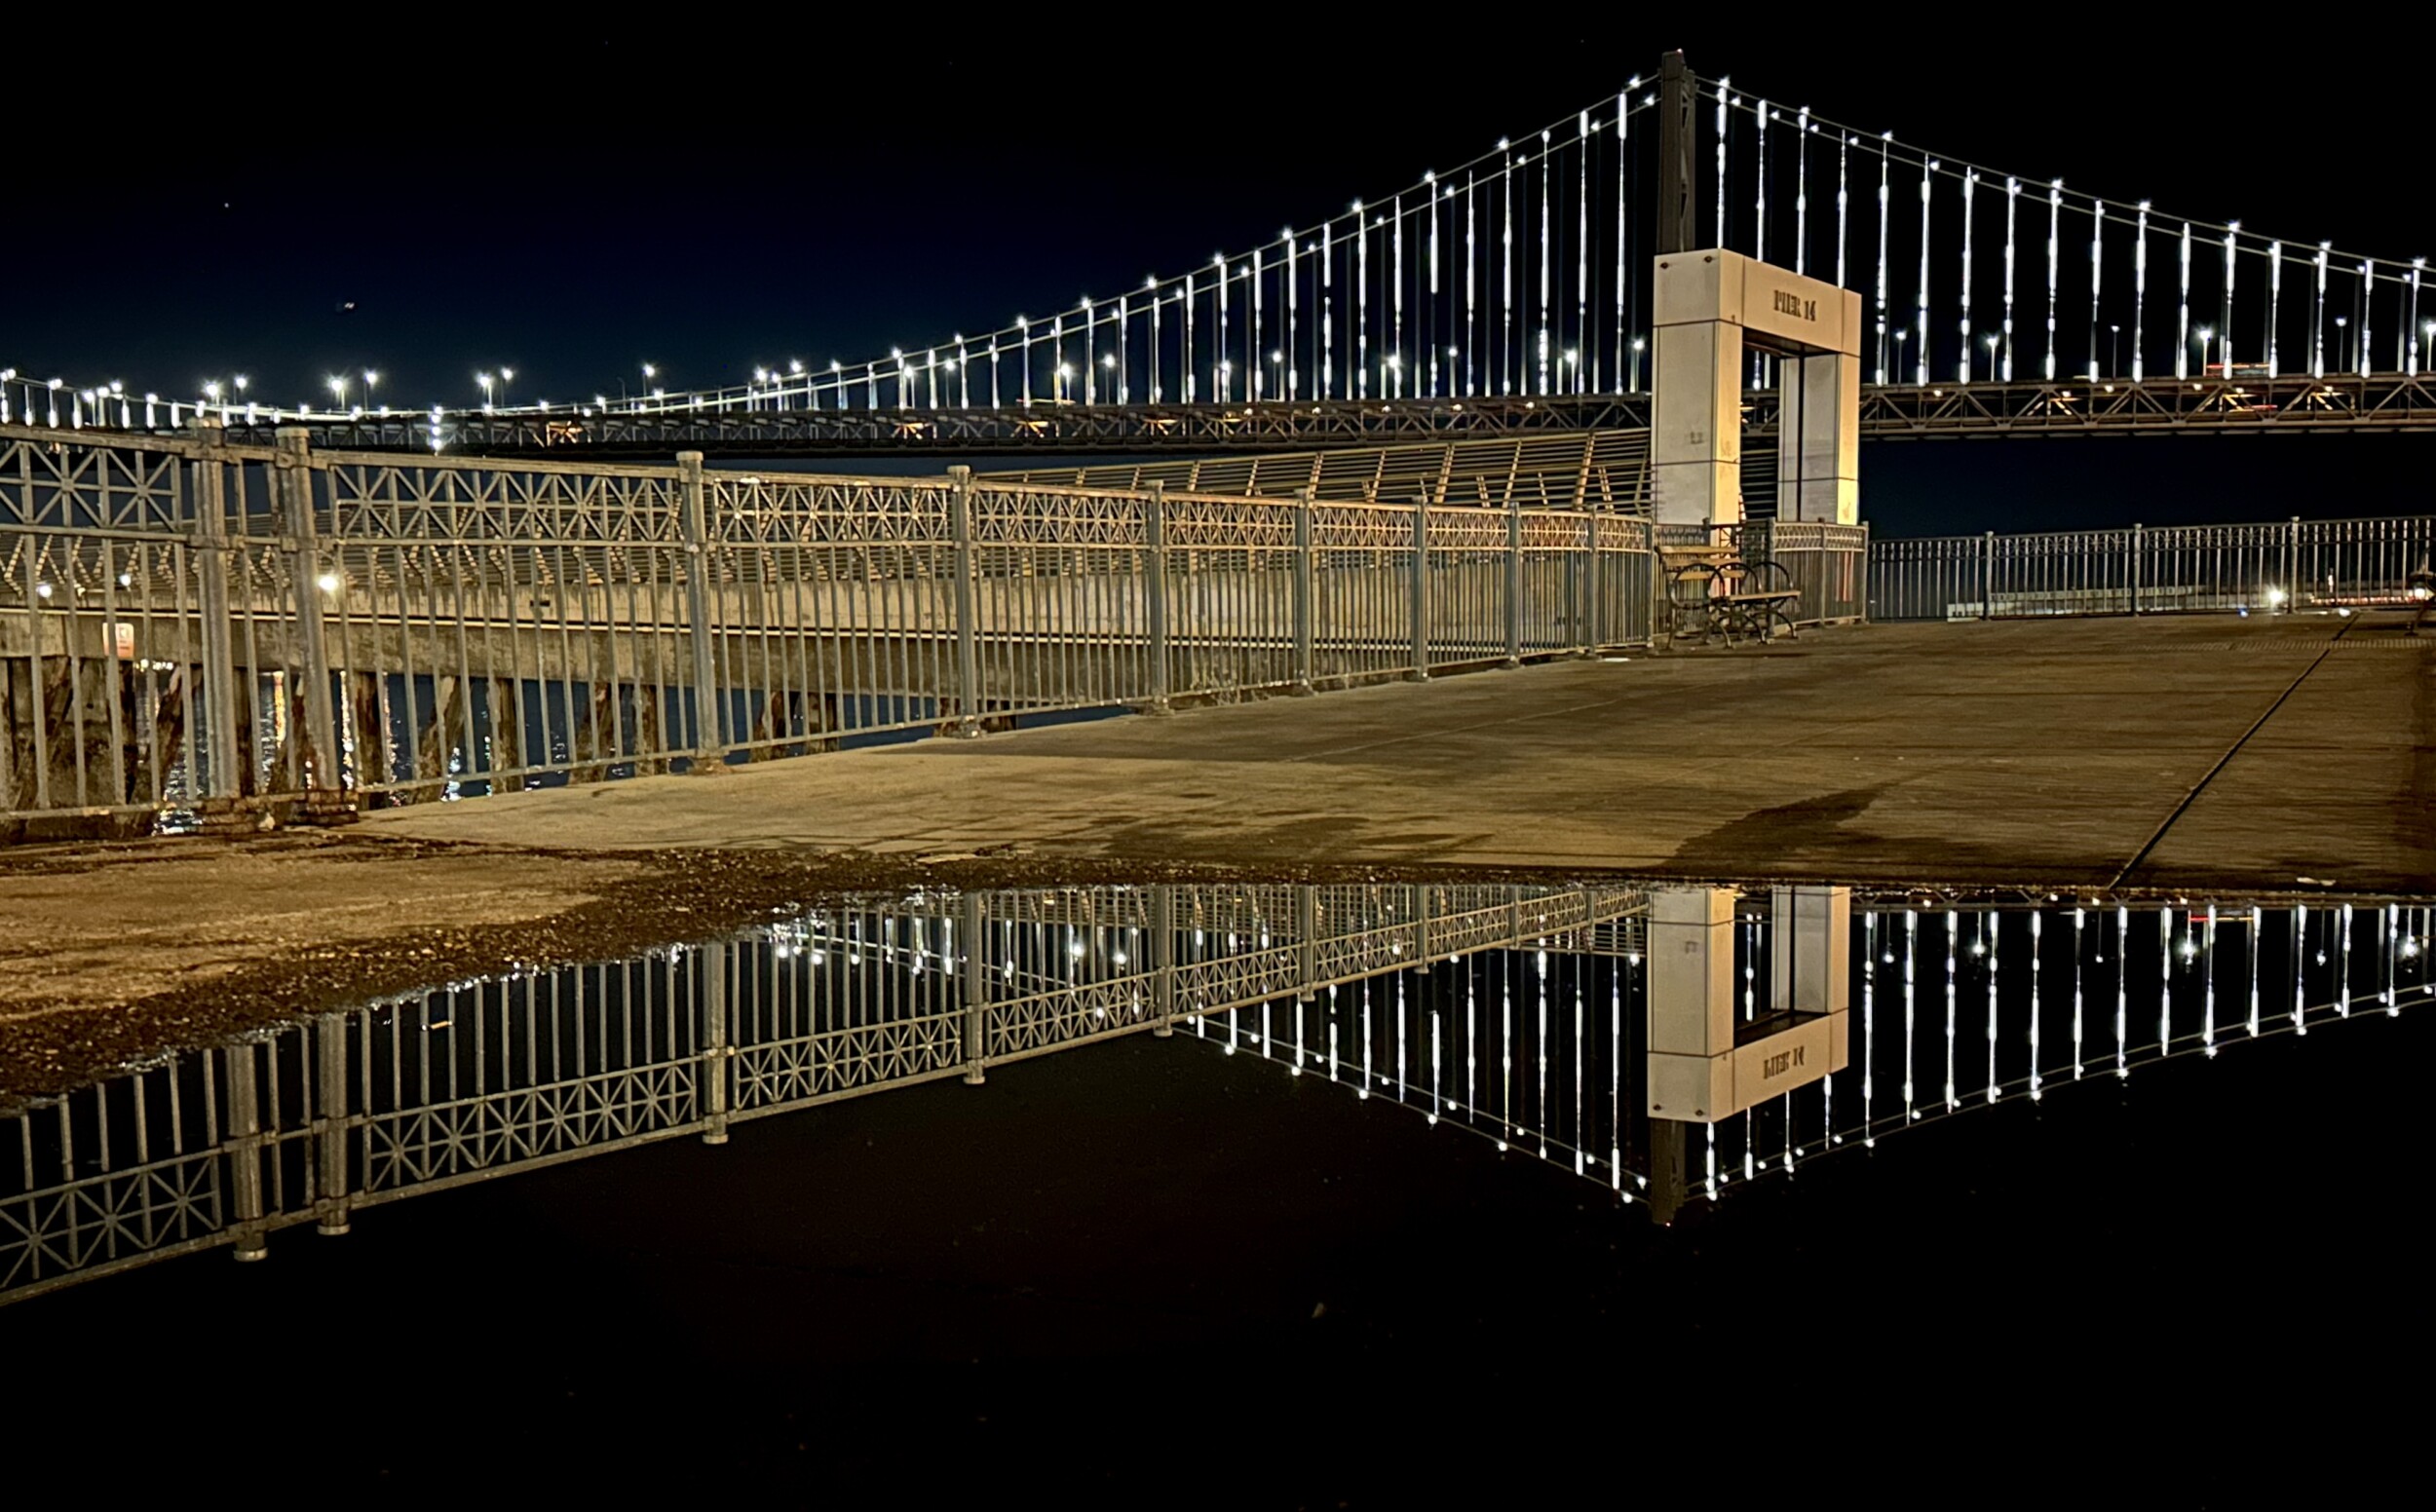 San Francisco Pier 14 Reflected in Puddle